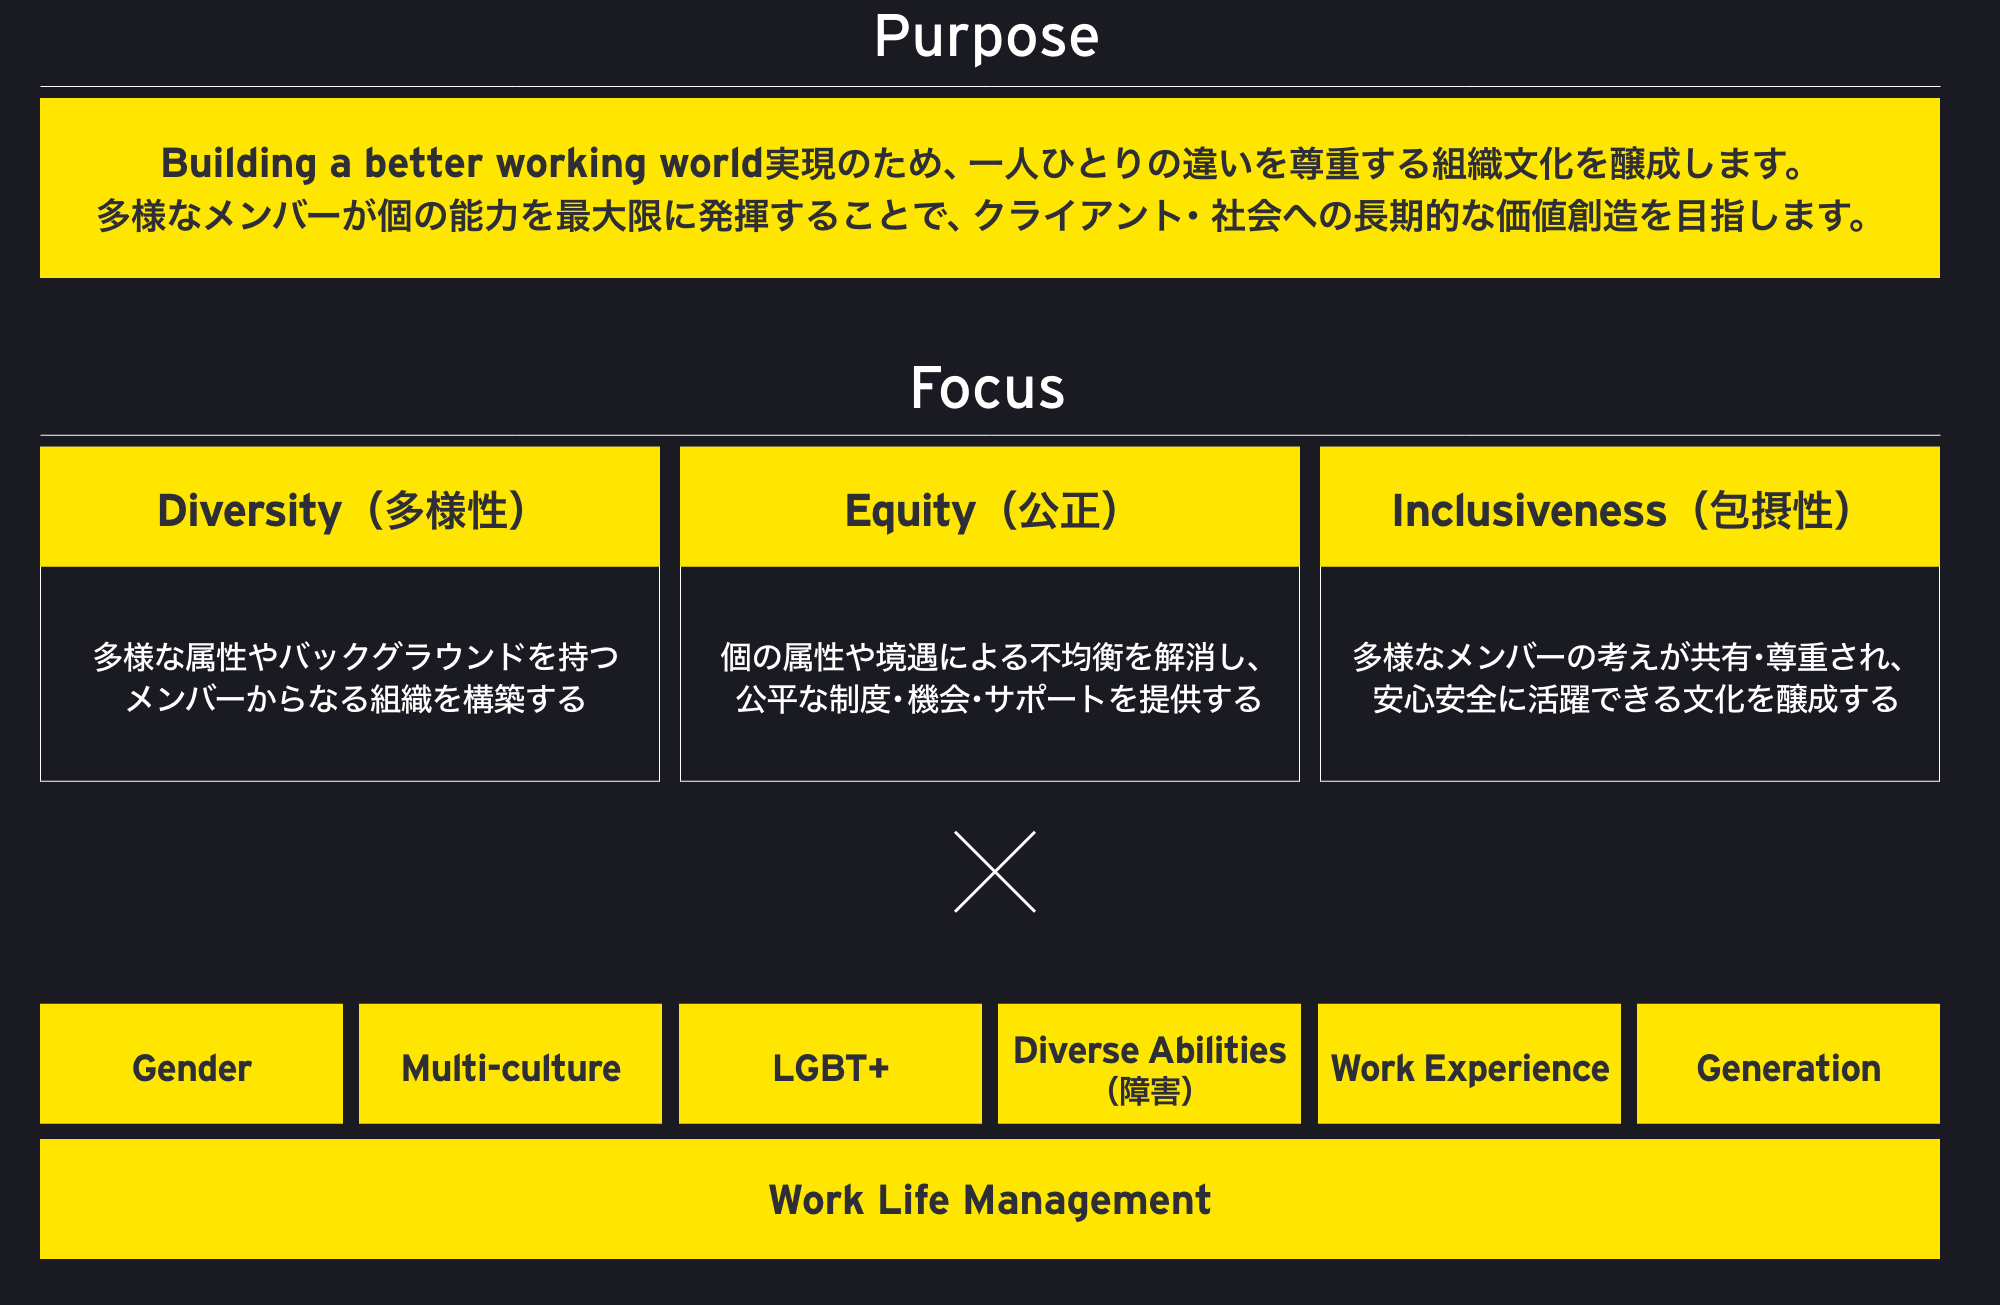 Gender、LGBT+、Multi Culture、Work Life Management、Diversified Abilities(PwD)、Generation